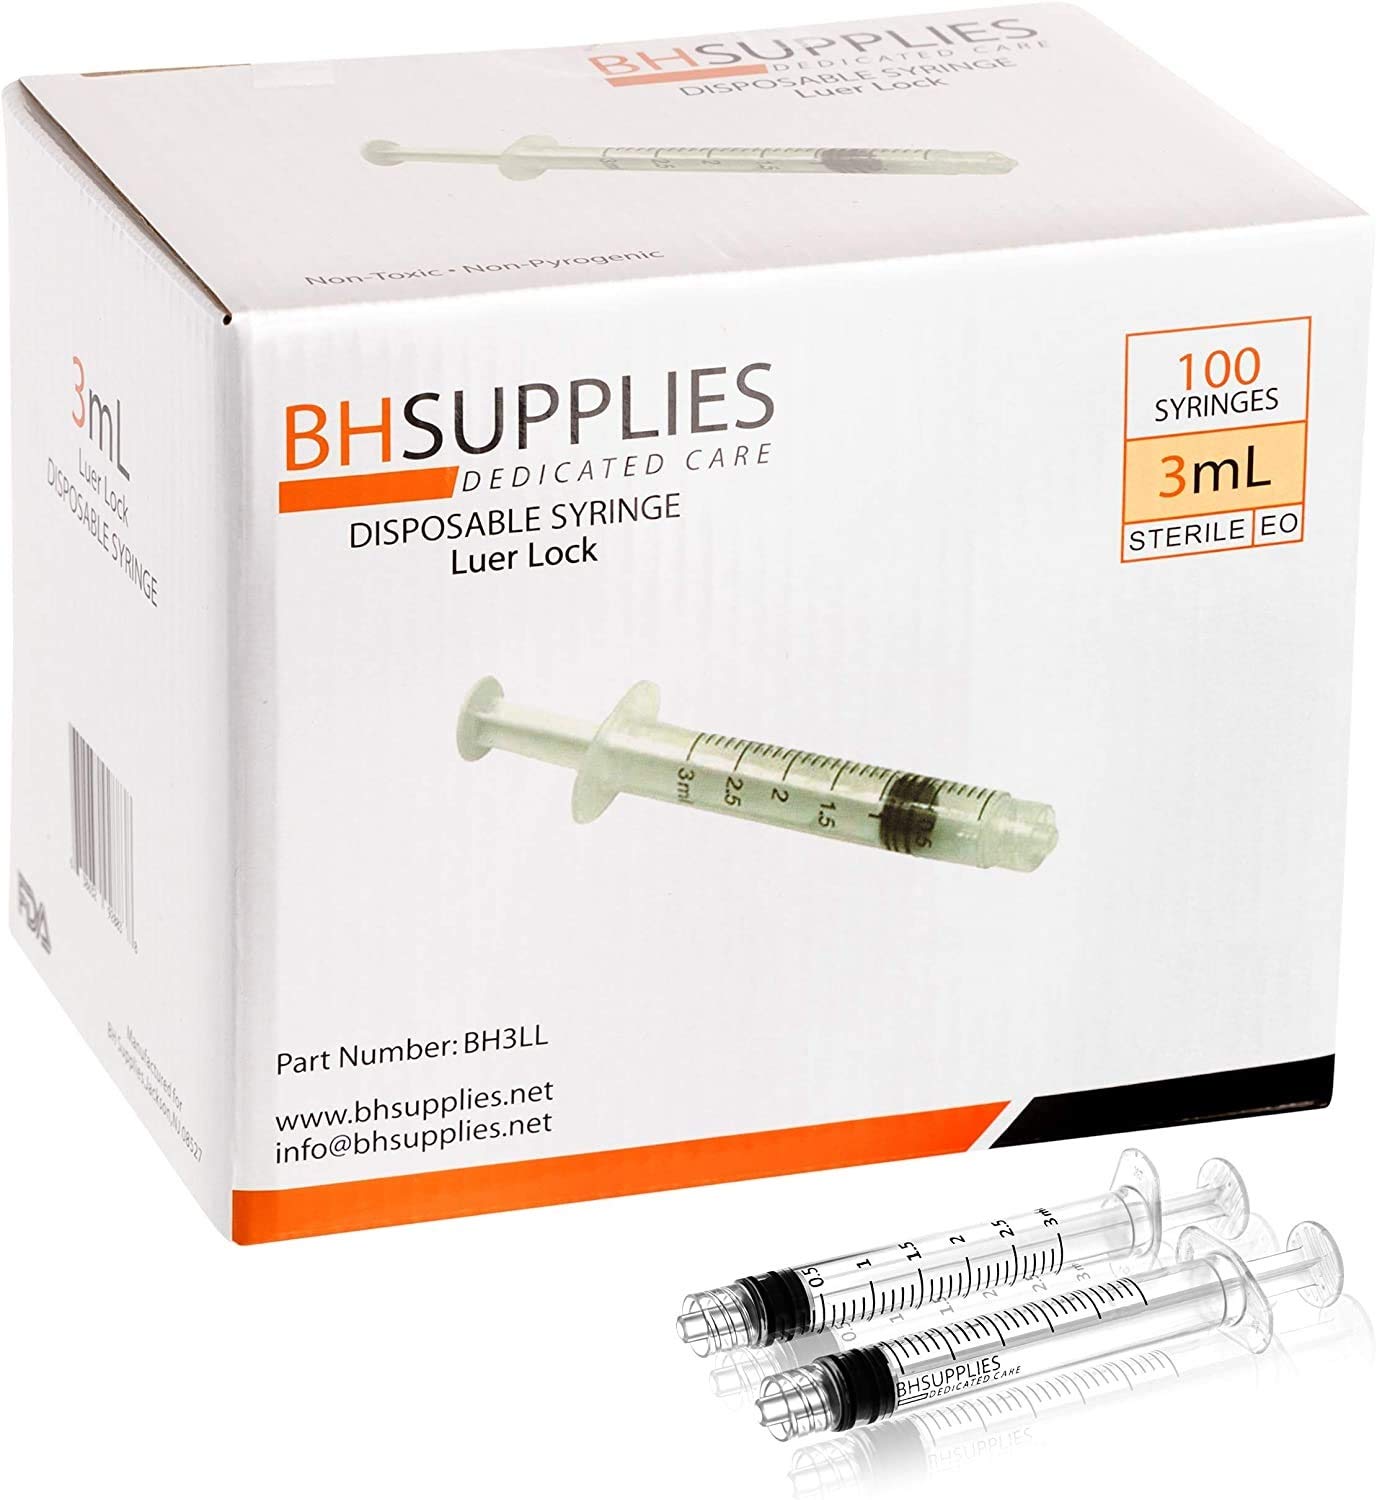 3ml Syringe Sterile with Luer Lock Tip - 100 Syringes by BH